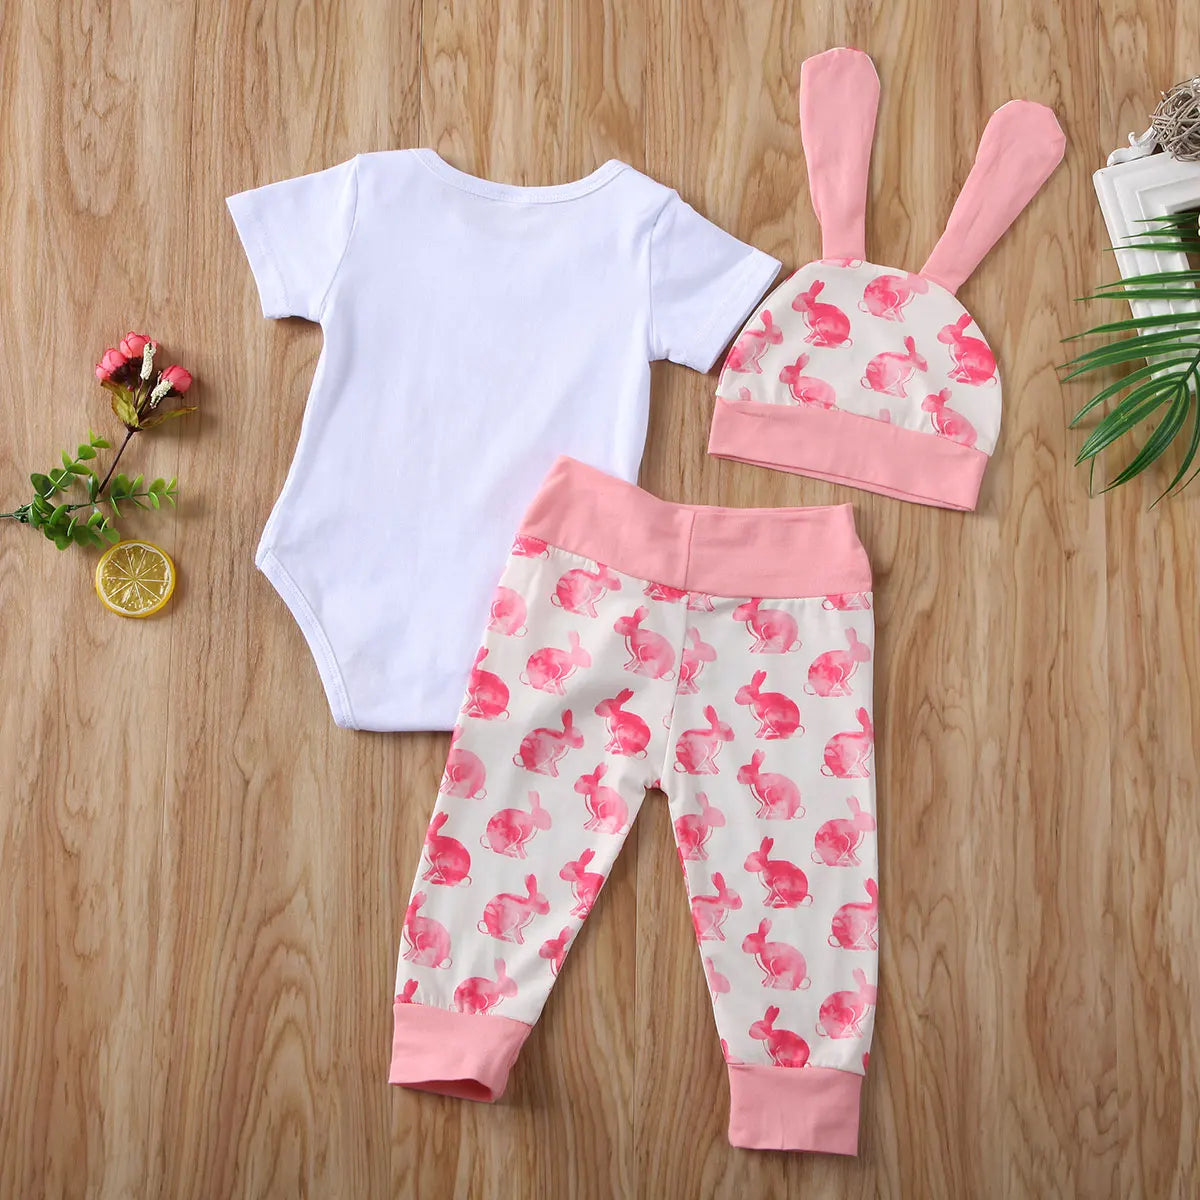 My First Easter Clothing Set Pink - Easter Collection